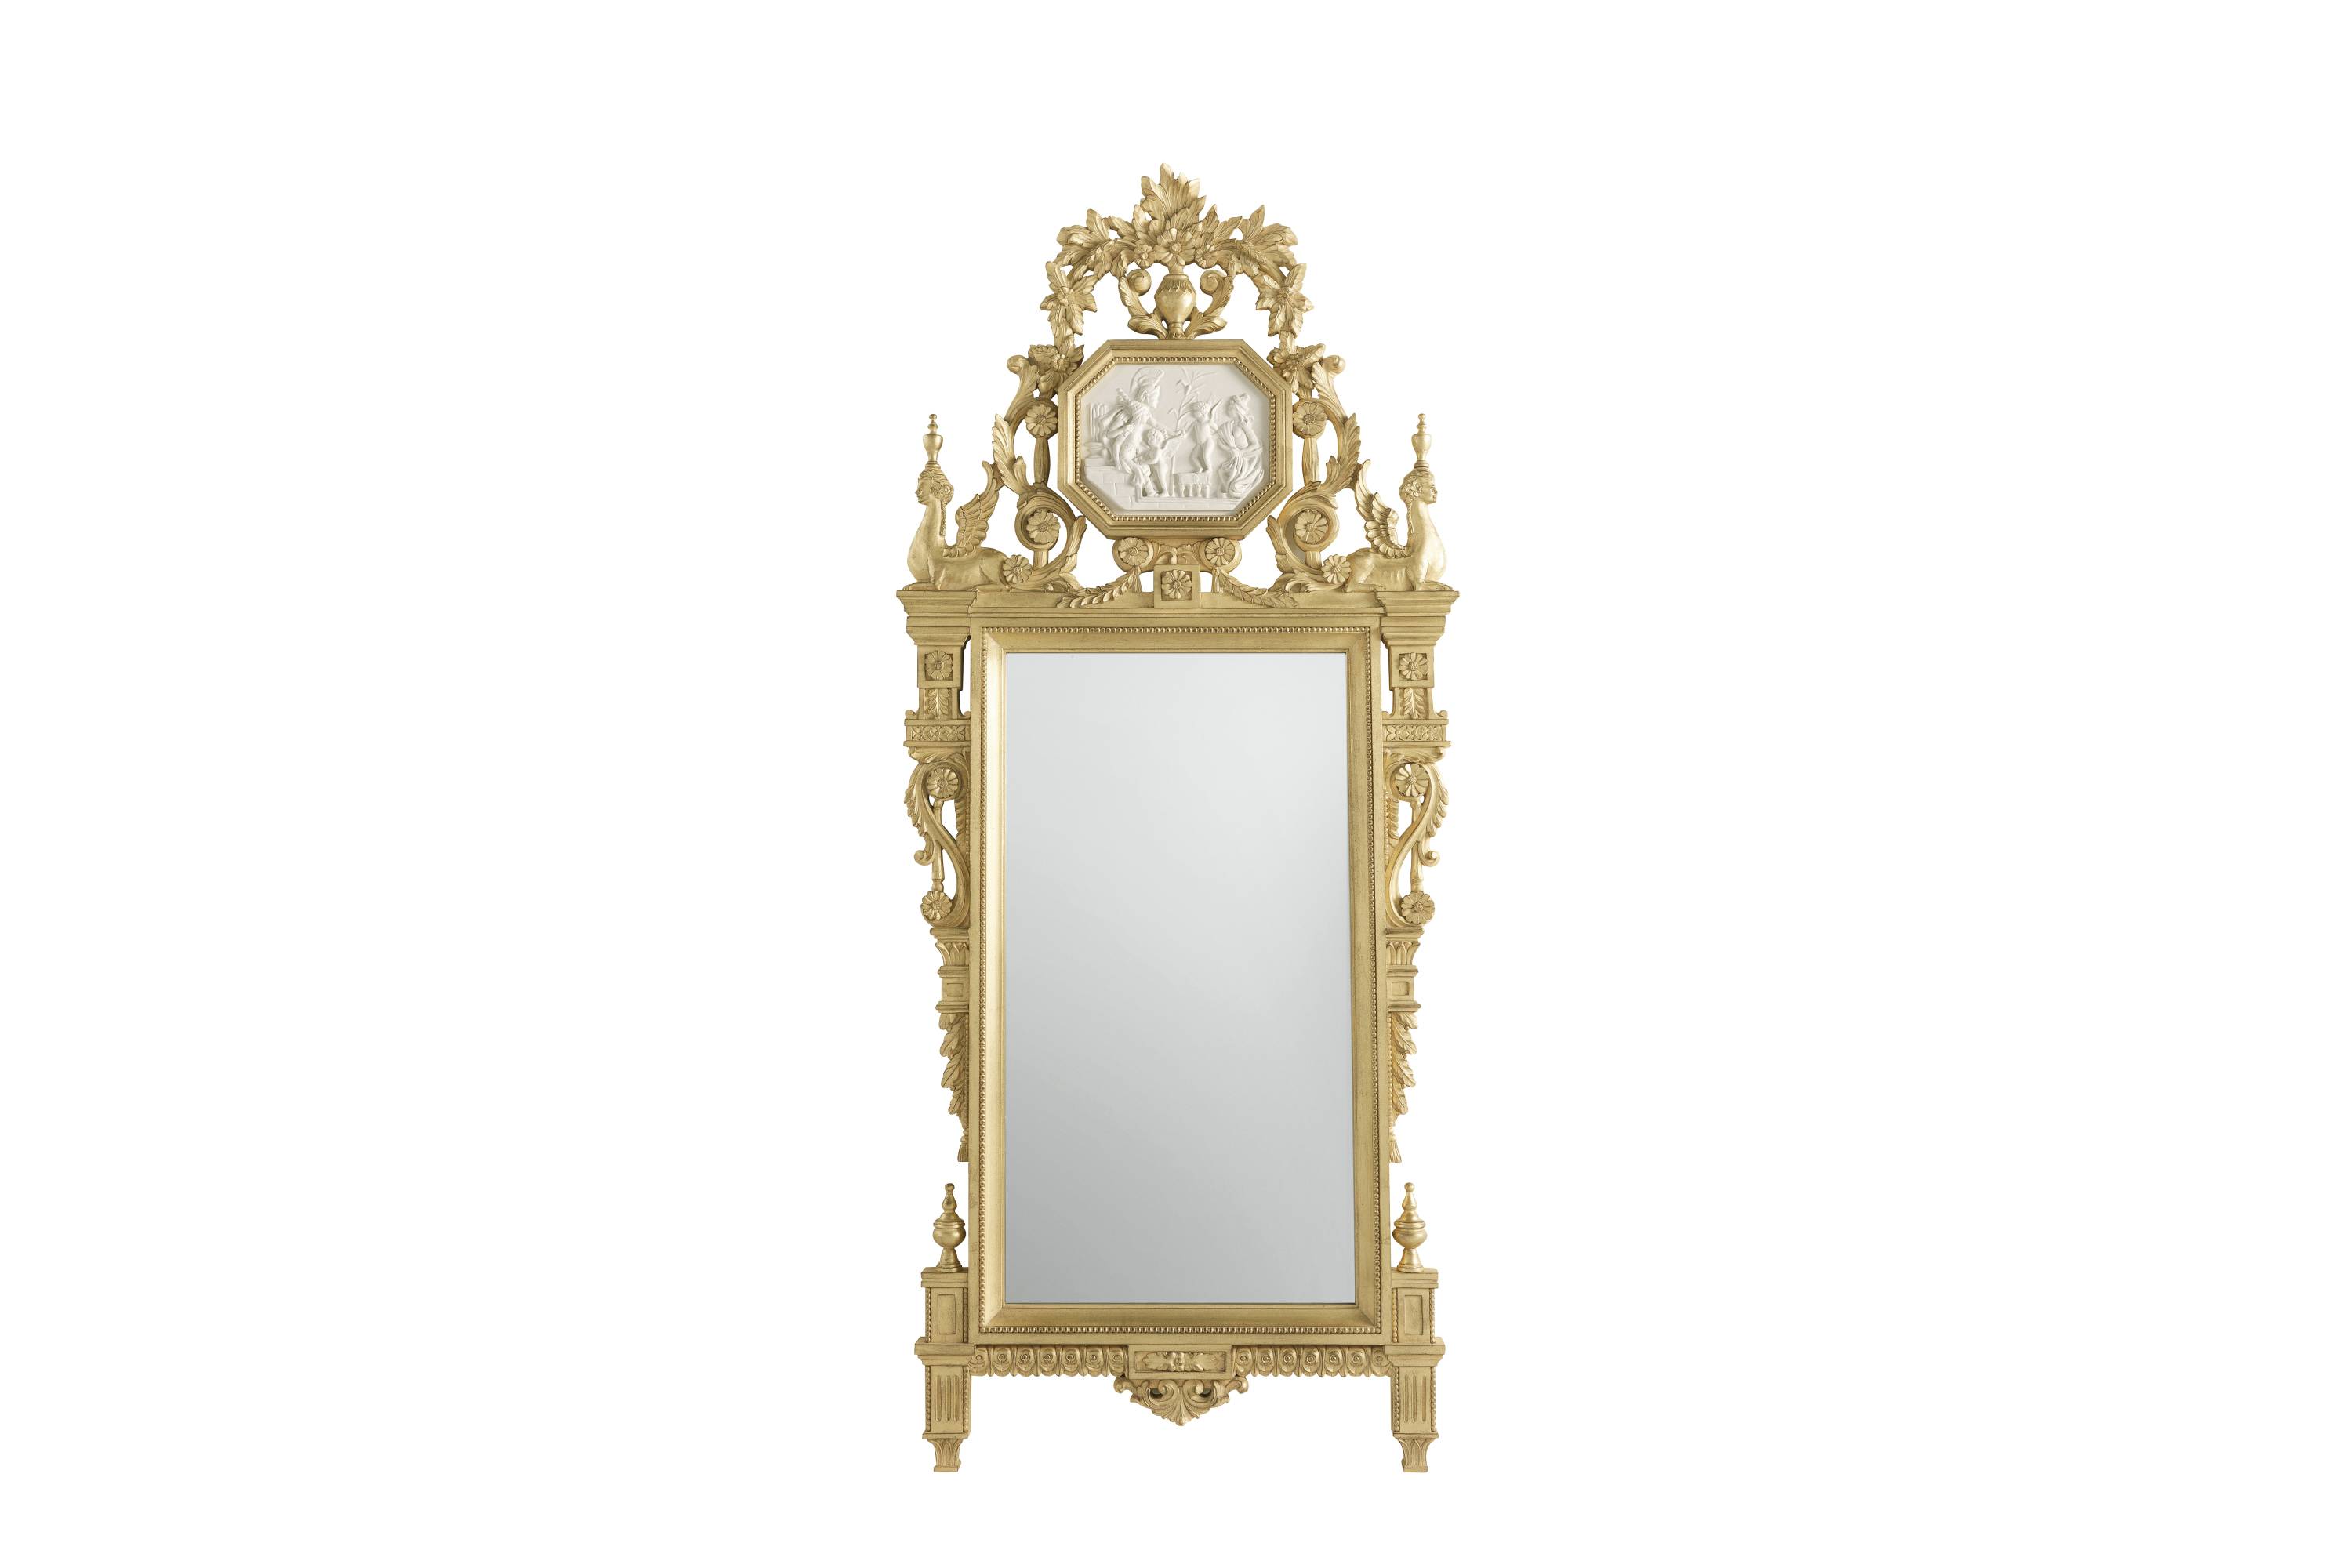 INTRIGUE mirror – Jumbo Collection Italian luxury classic MIRRORS. tailor-made interior design projects to meet all your furnishing needs